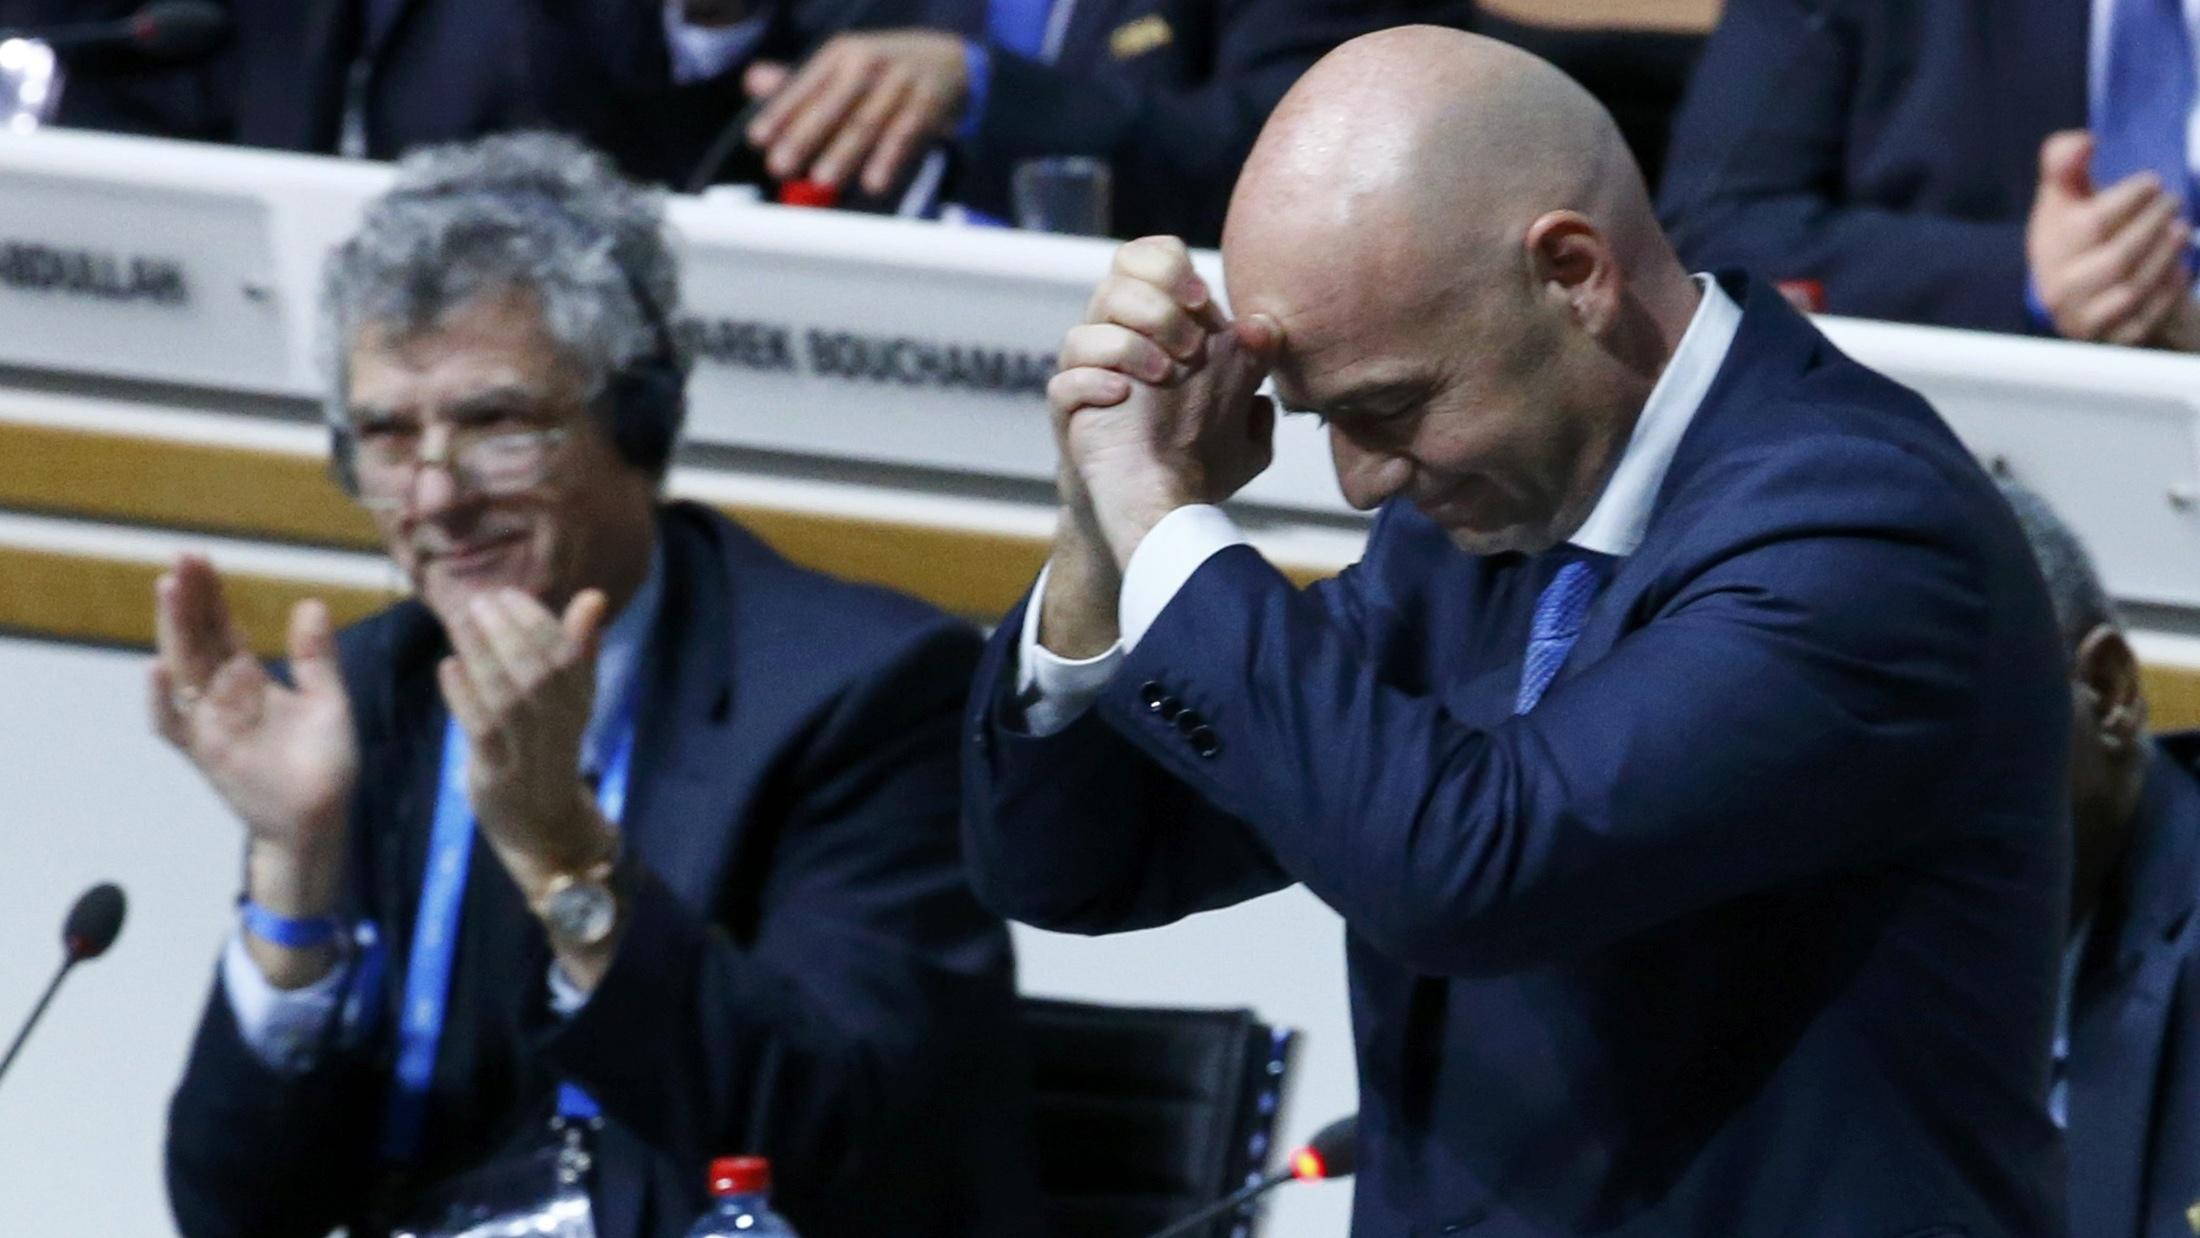 Newly elected FIFA President Gianni Infantino reacts during the Extraordinary Congress in Zurich, Switzerland February 26, 2016. Infantino was chosen as the new president of FIFA, a position which made his predecessor Sepp Blatter as instantly recogn